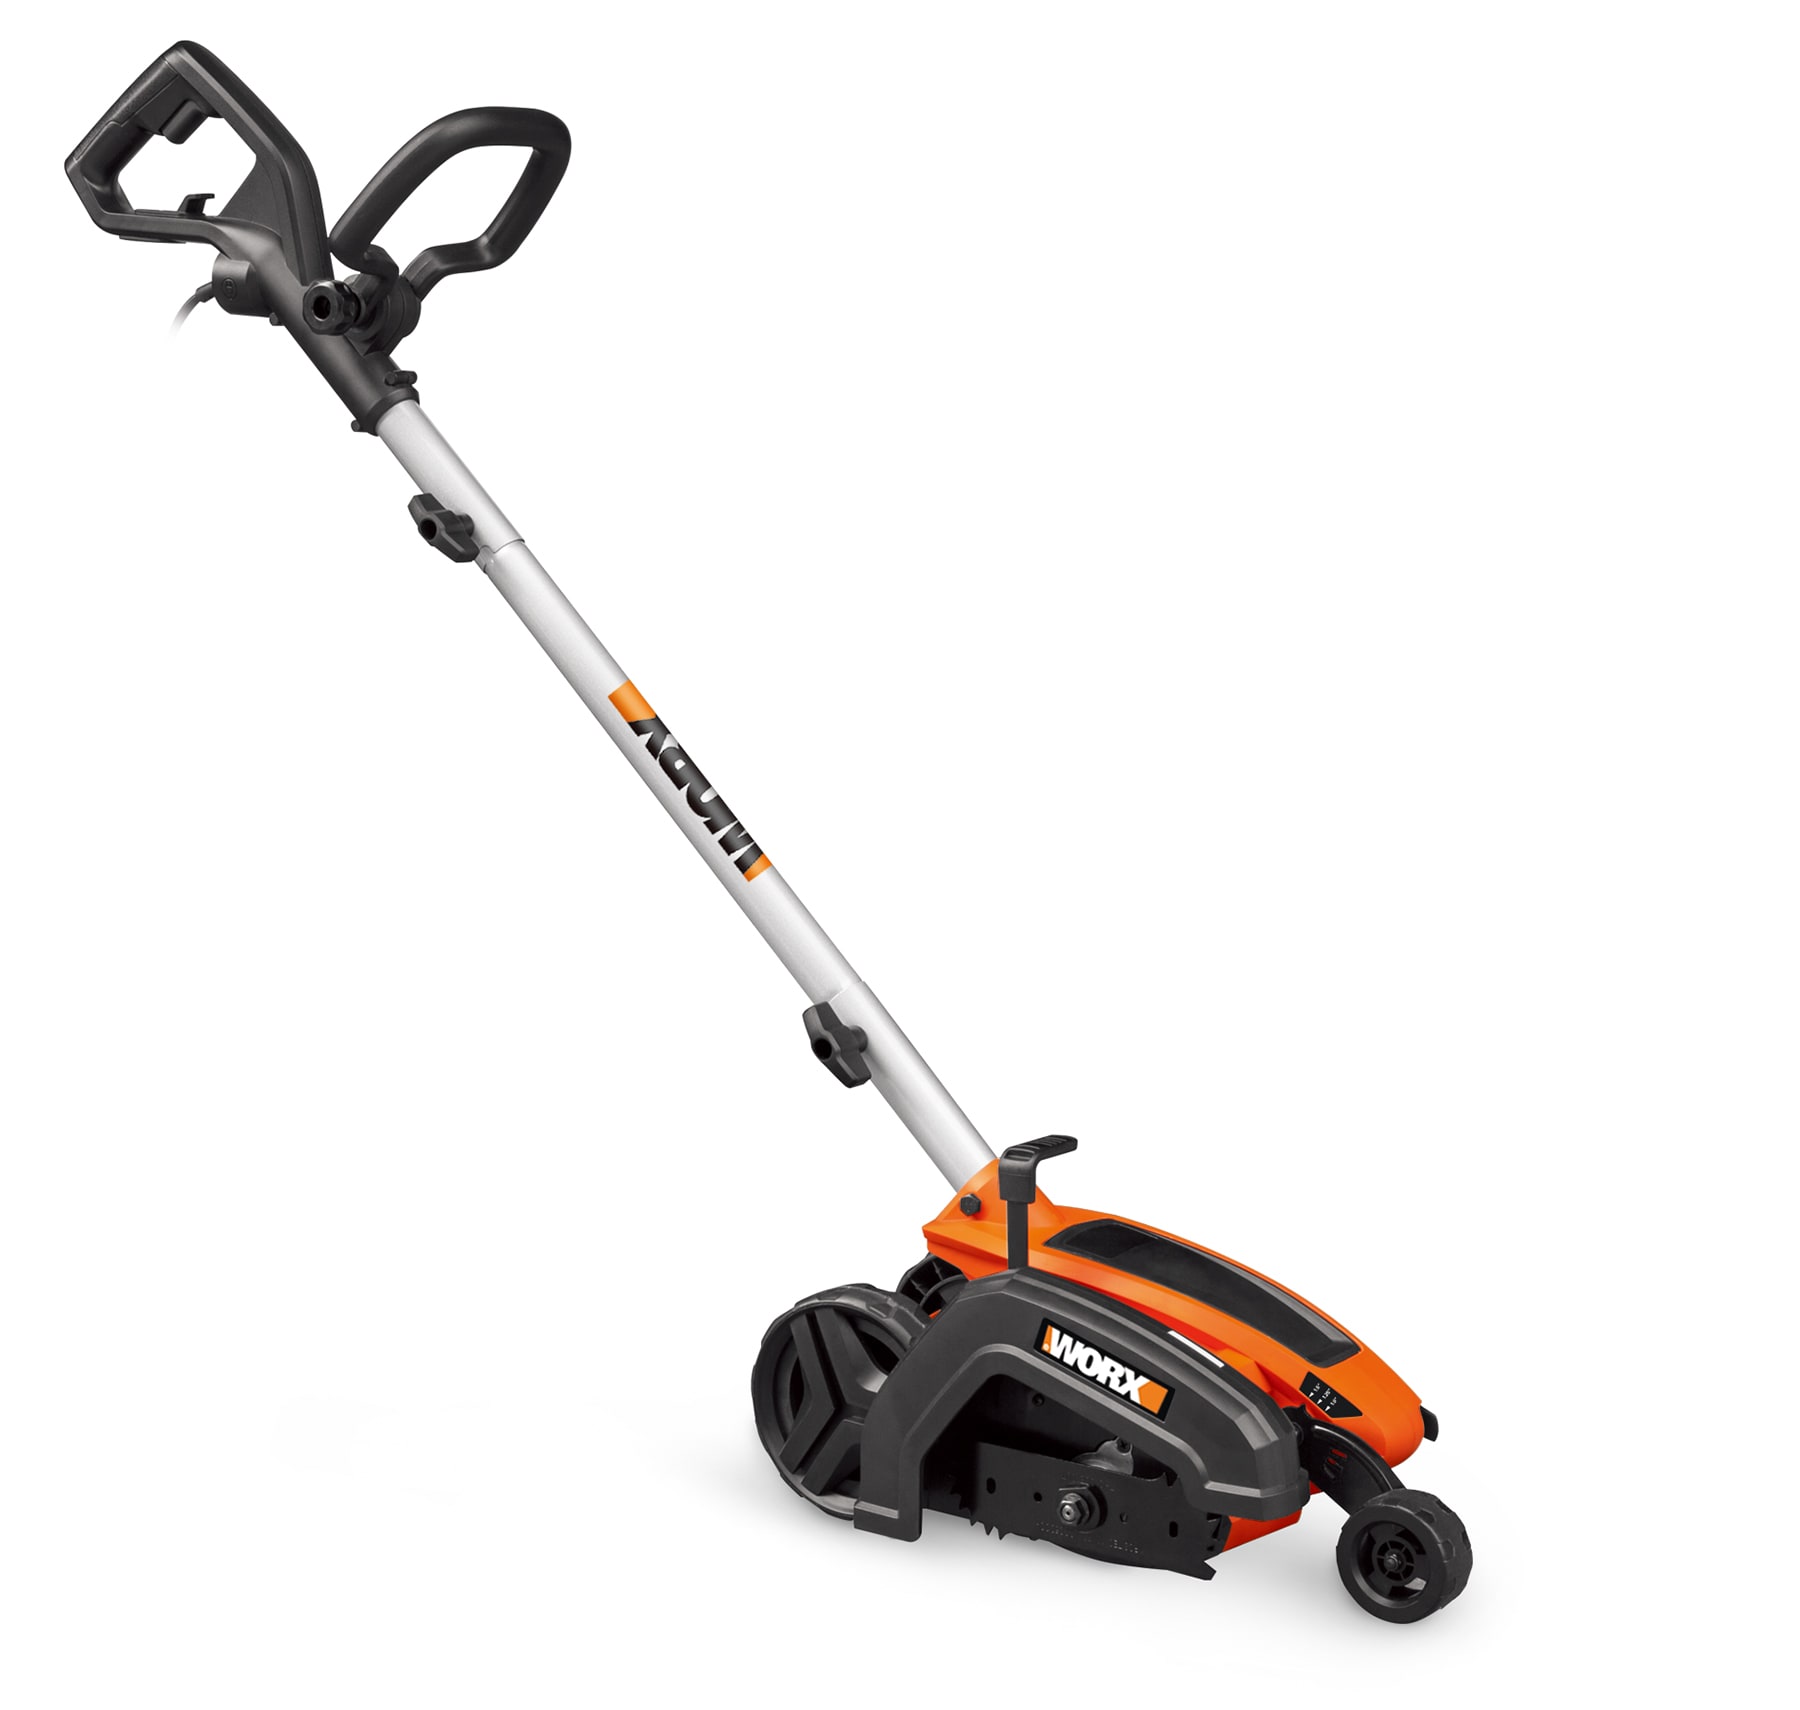 3-In-1 String Trimmer/Edger & Lawn Mower, 6.5-Amp, 12-Inch, Corded